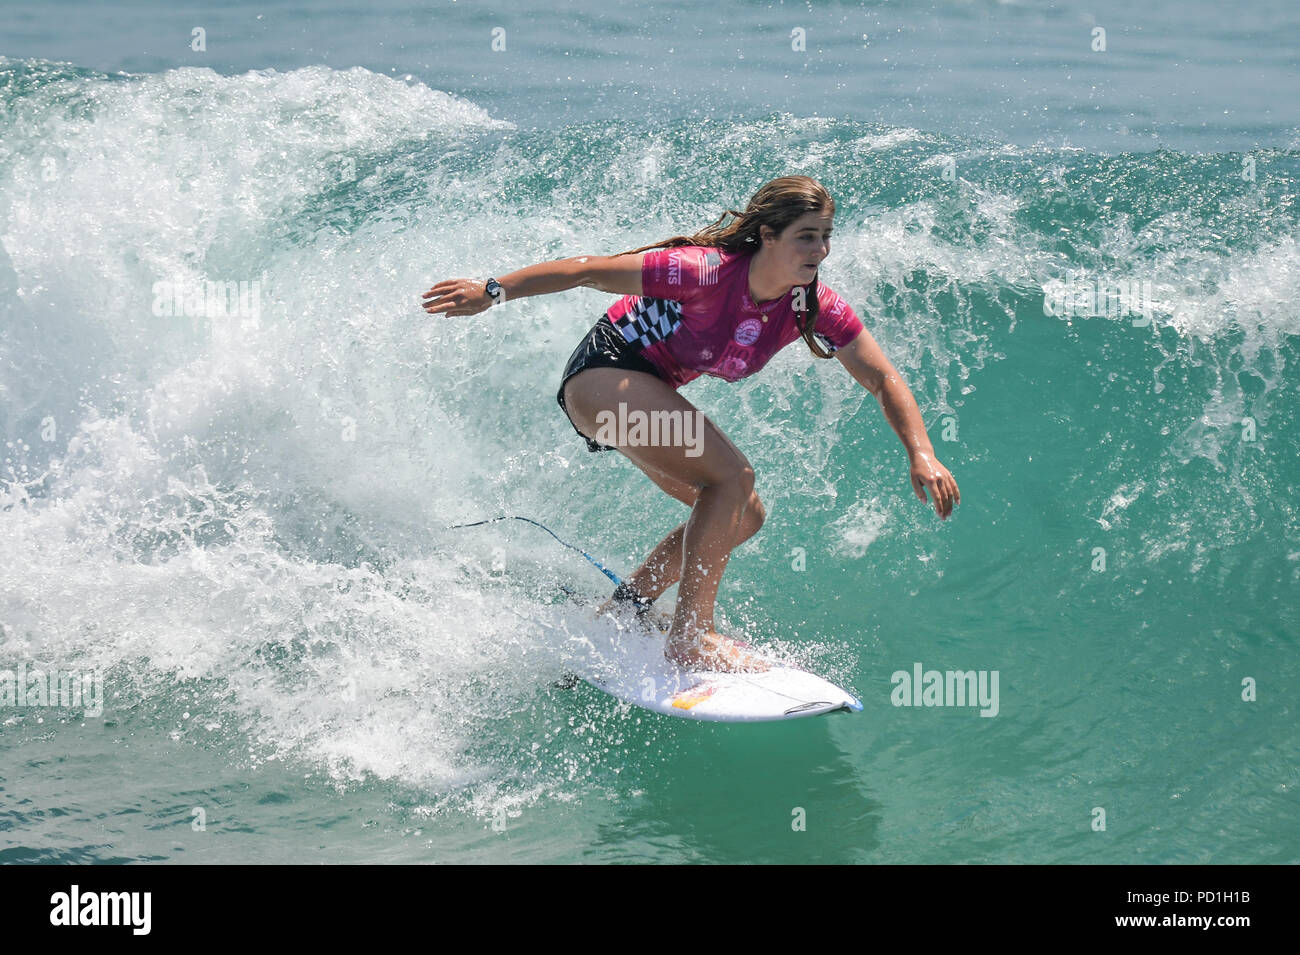 Huntington Beach, California, USA. 3rd Aug, 2018. CAROLINE MARKS, from the  United States, competes in the first round heat of the Vans US Open held at  Huntington Beach, California. Credit: Amy Sanderson/ZUMA